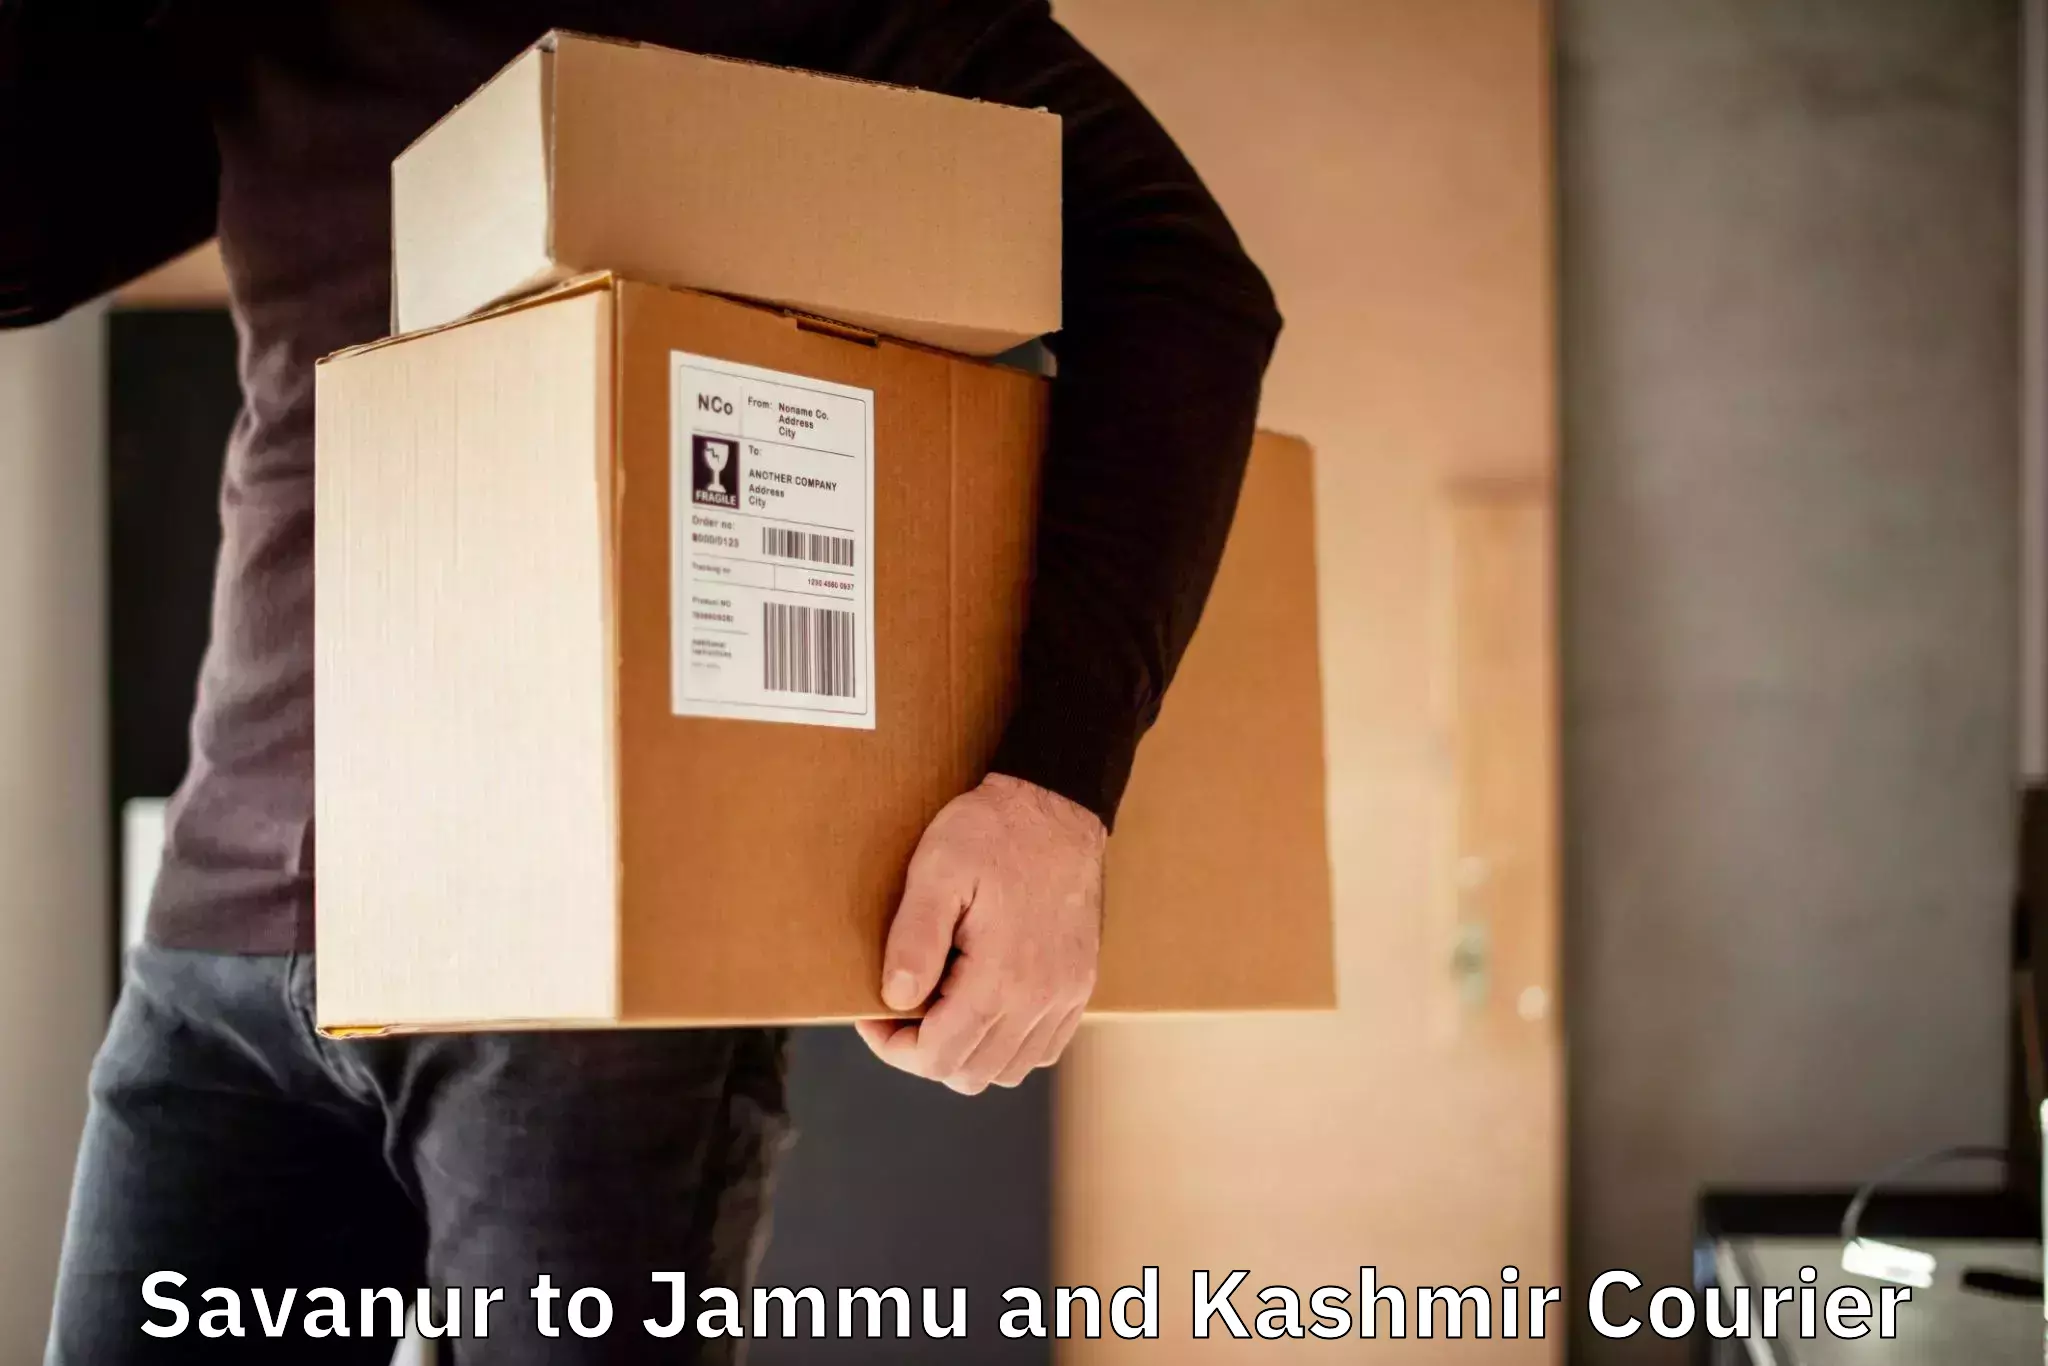 Courier service partnerships in Savanur to Shopian